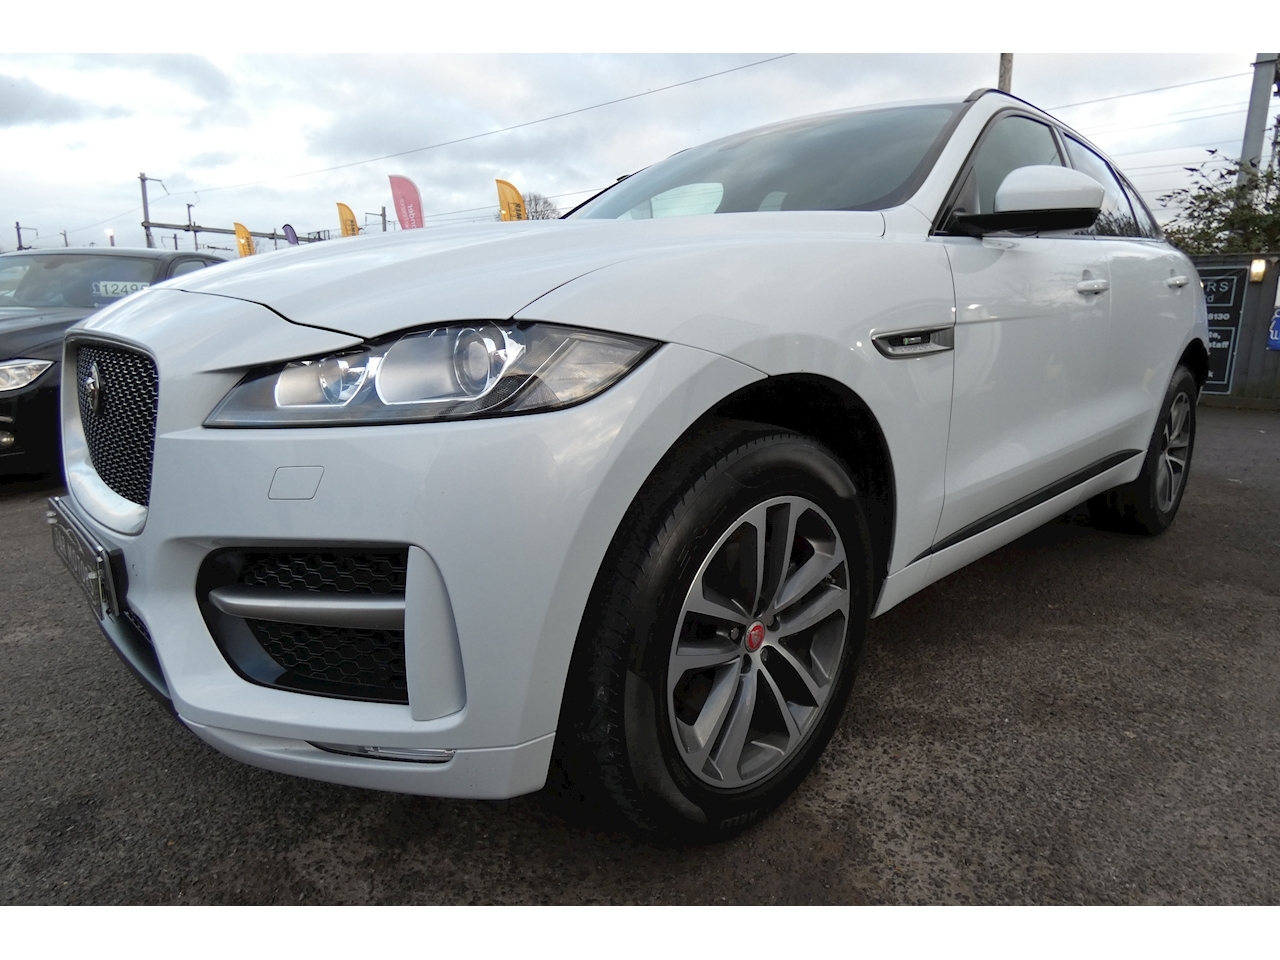 2.0d R-Sport SUV 5dr Diesel Auto (s/s) (180 ps)